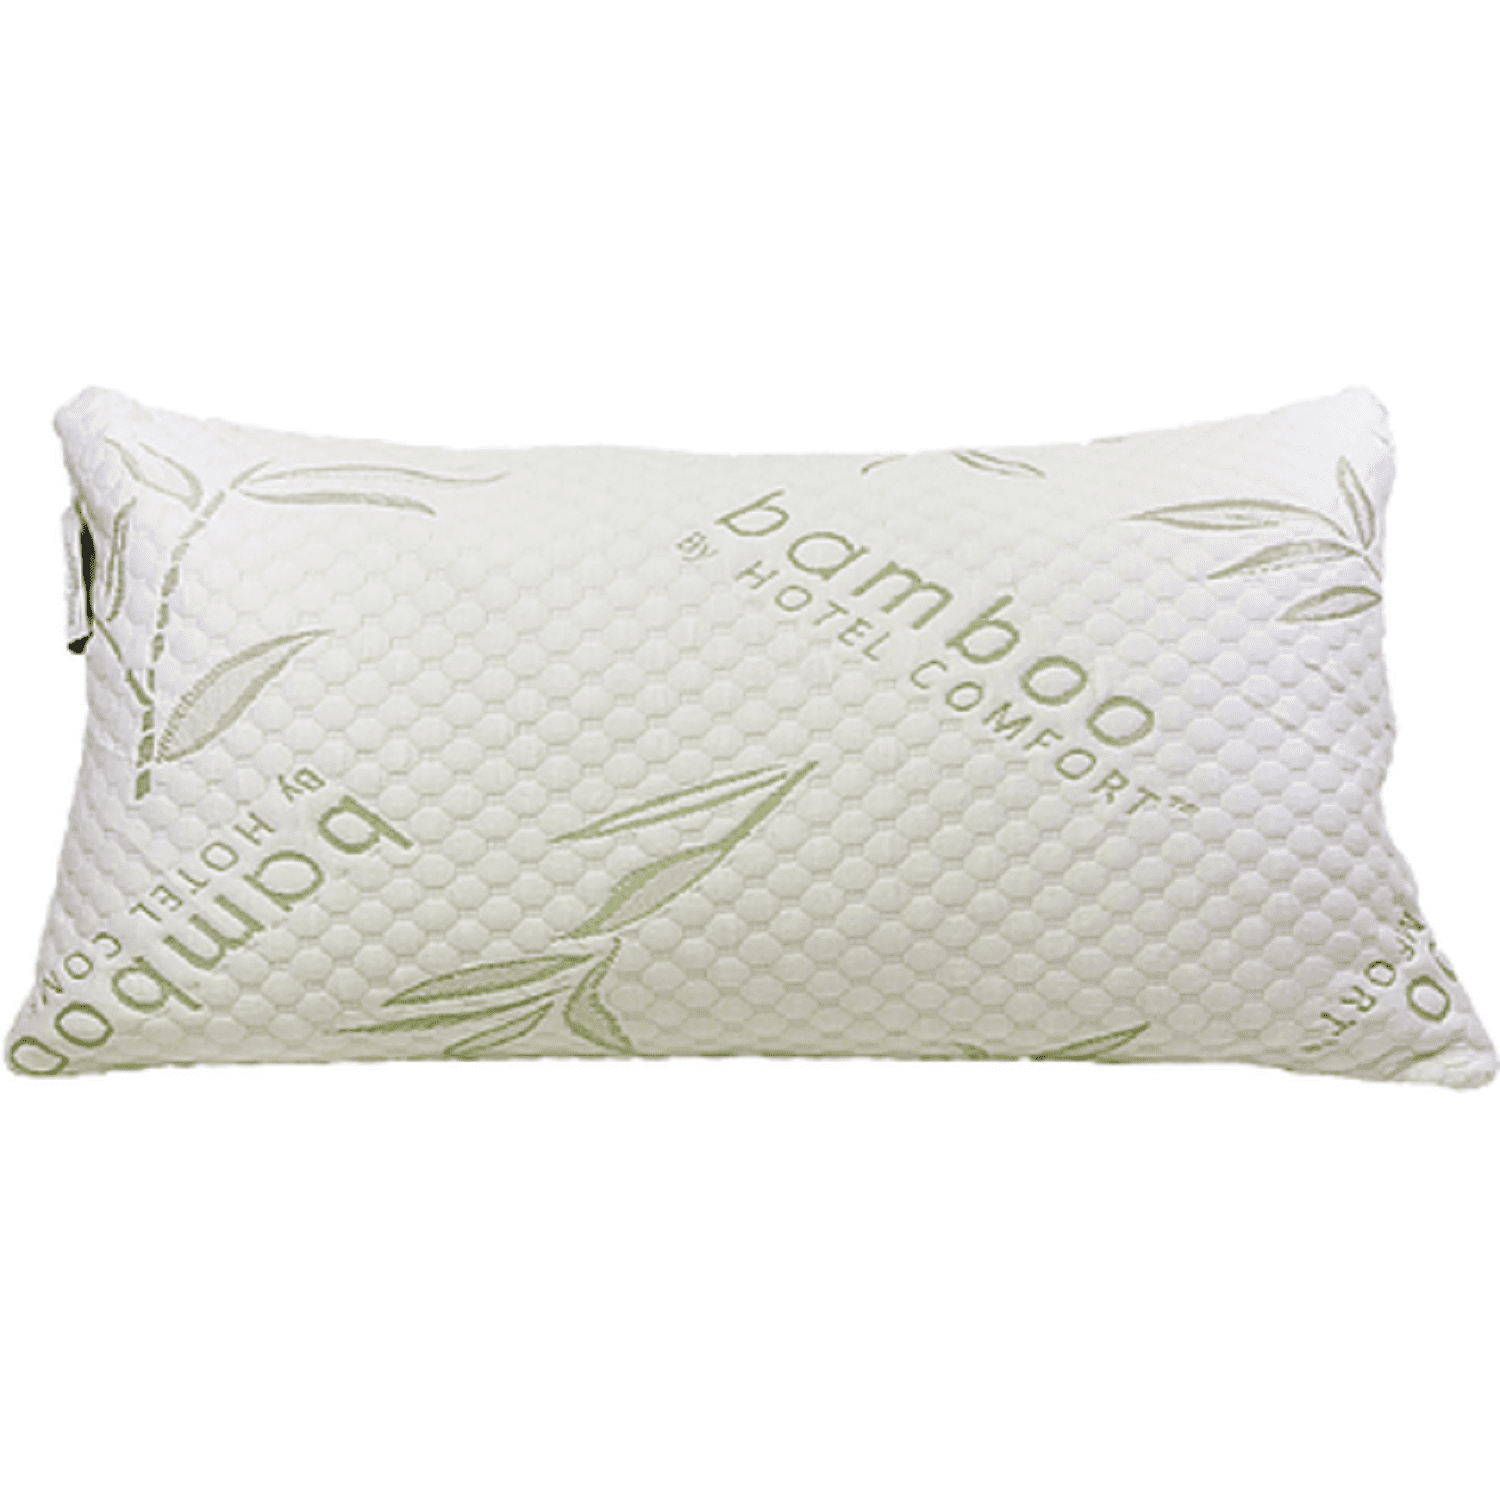 Sweet Home  Hypoallergenic Bamboo Memory Foam Pillow King with Carry Bag 